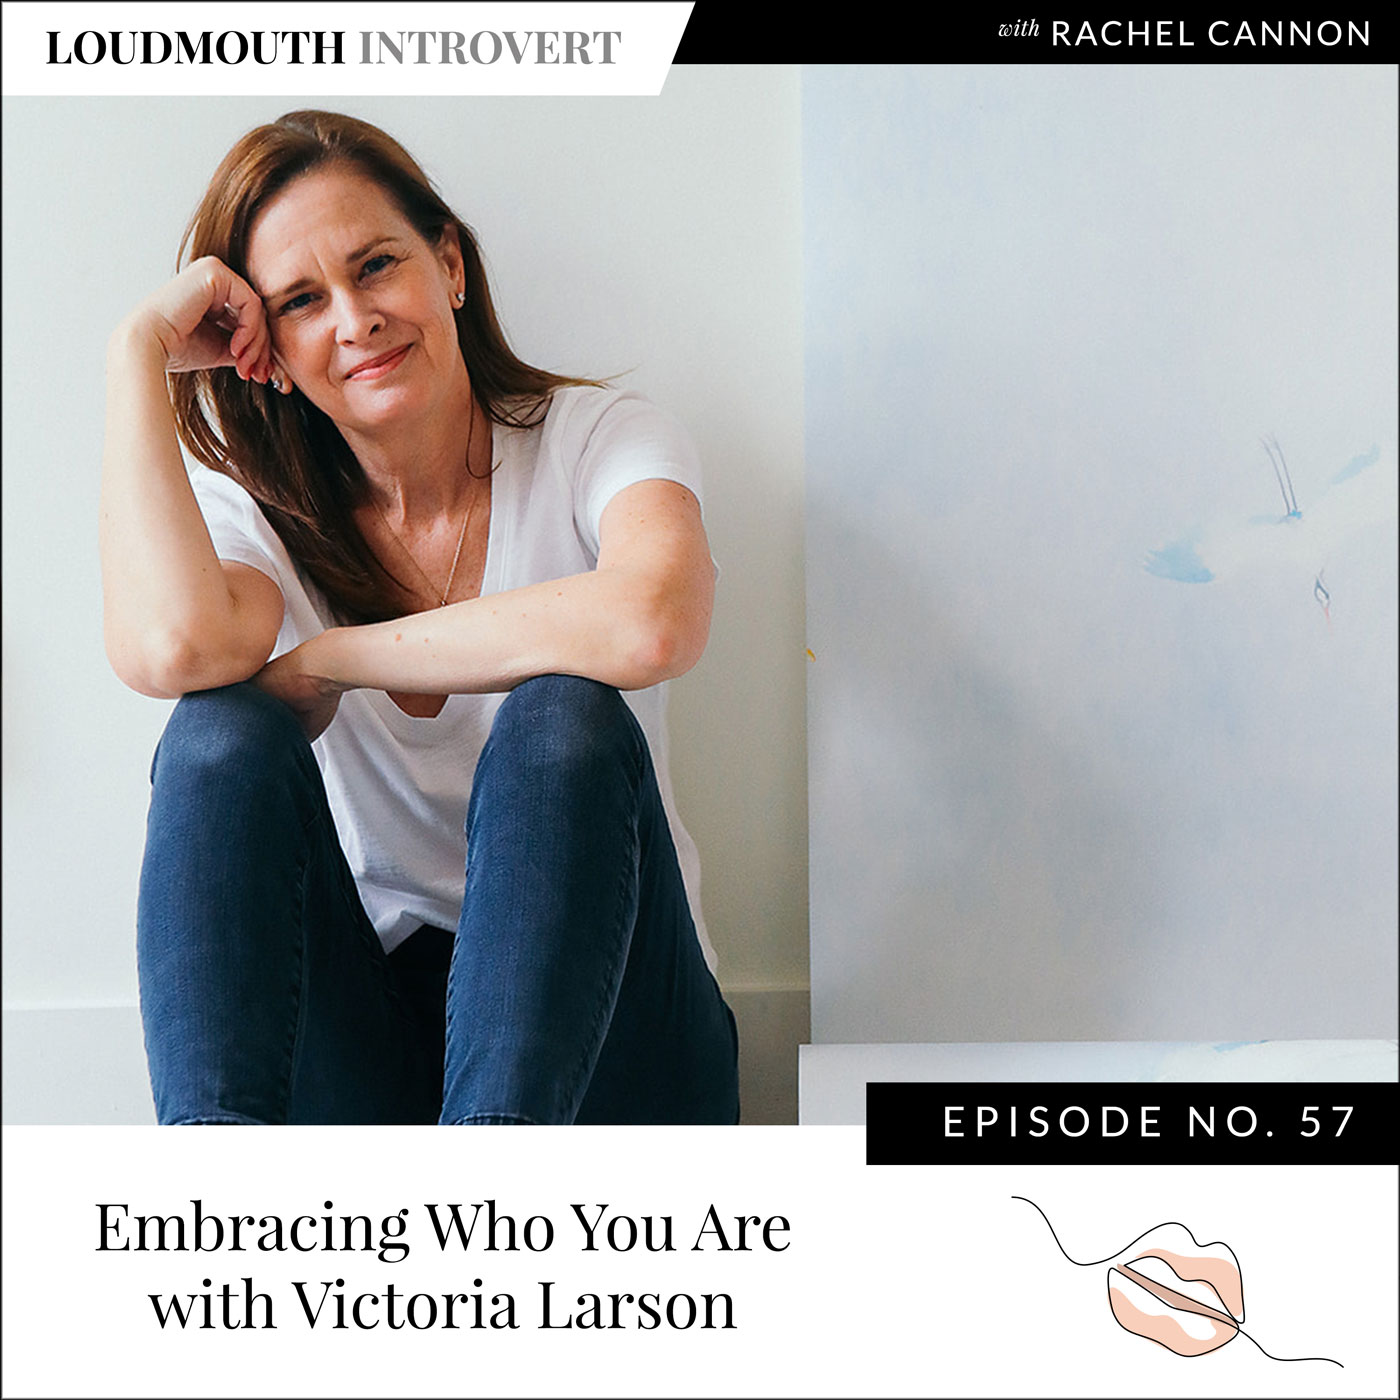 Embracing Who You Are with Victoria Larson